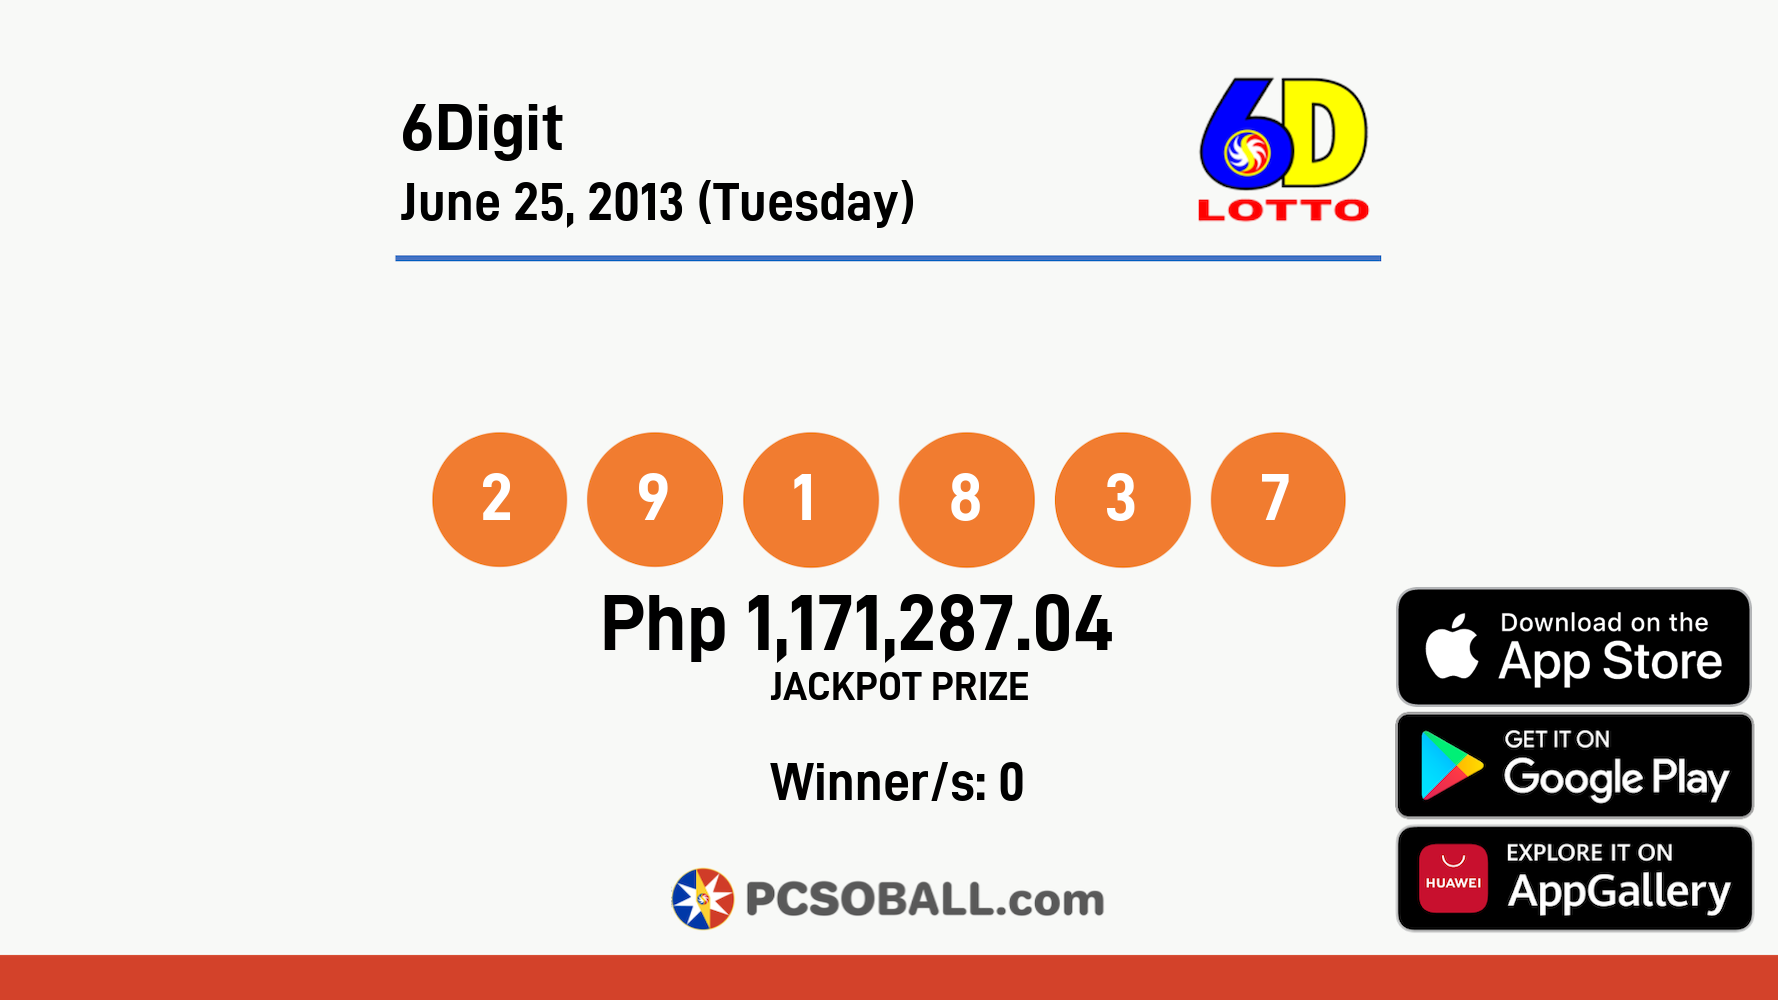 6Digit June 25, 2013 (Tuesday) Result